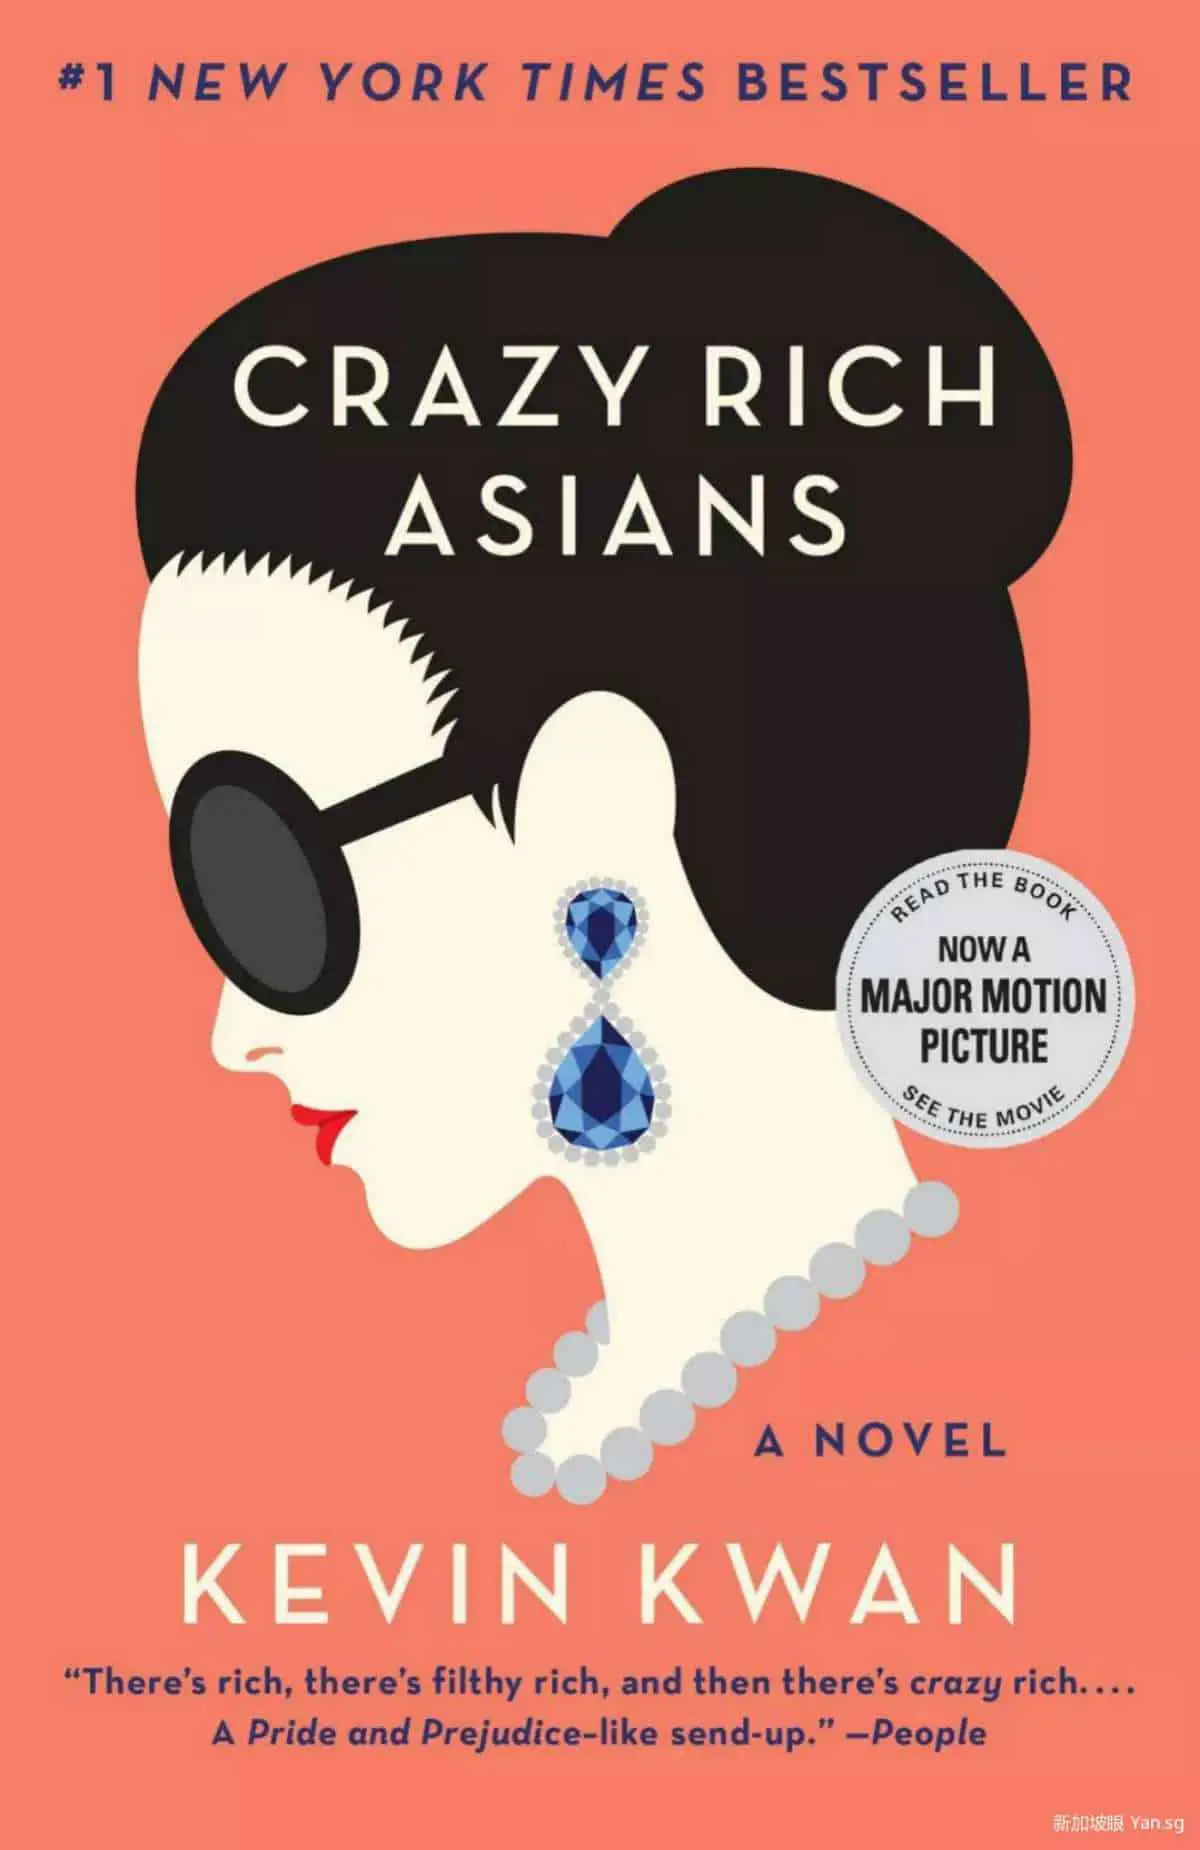 Crazy Rich Asians | Bestselling Amazon Kindle Books Of 2018